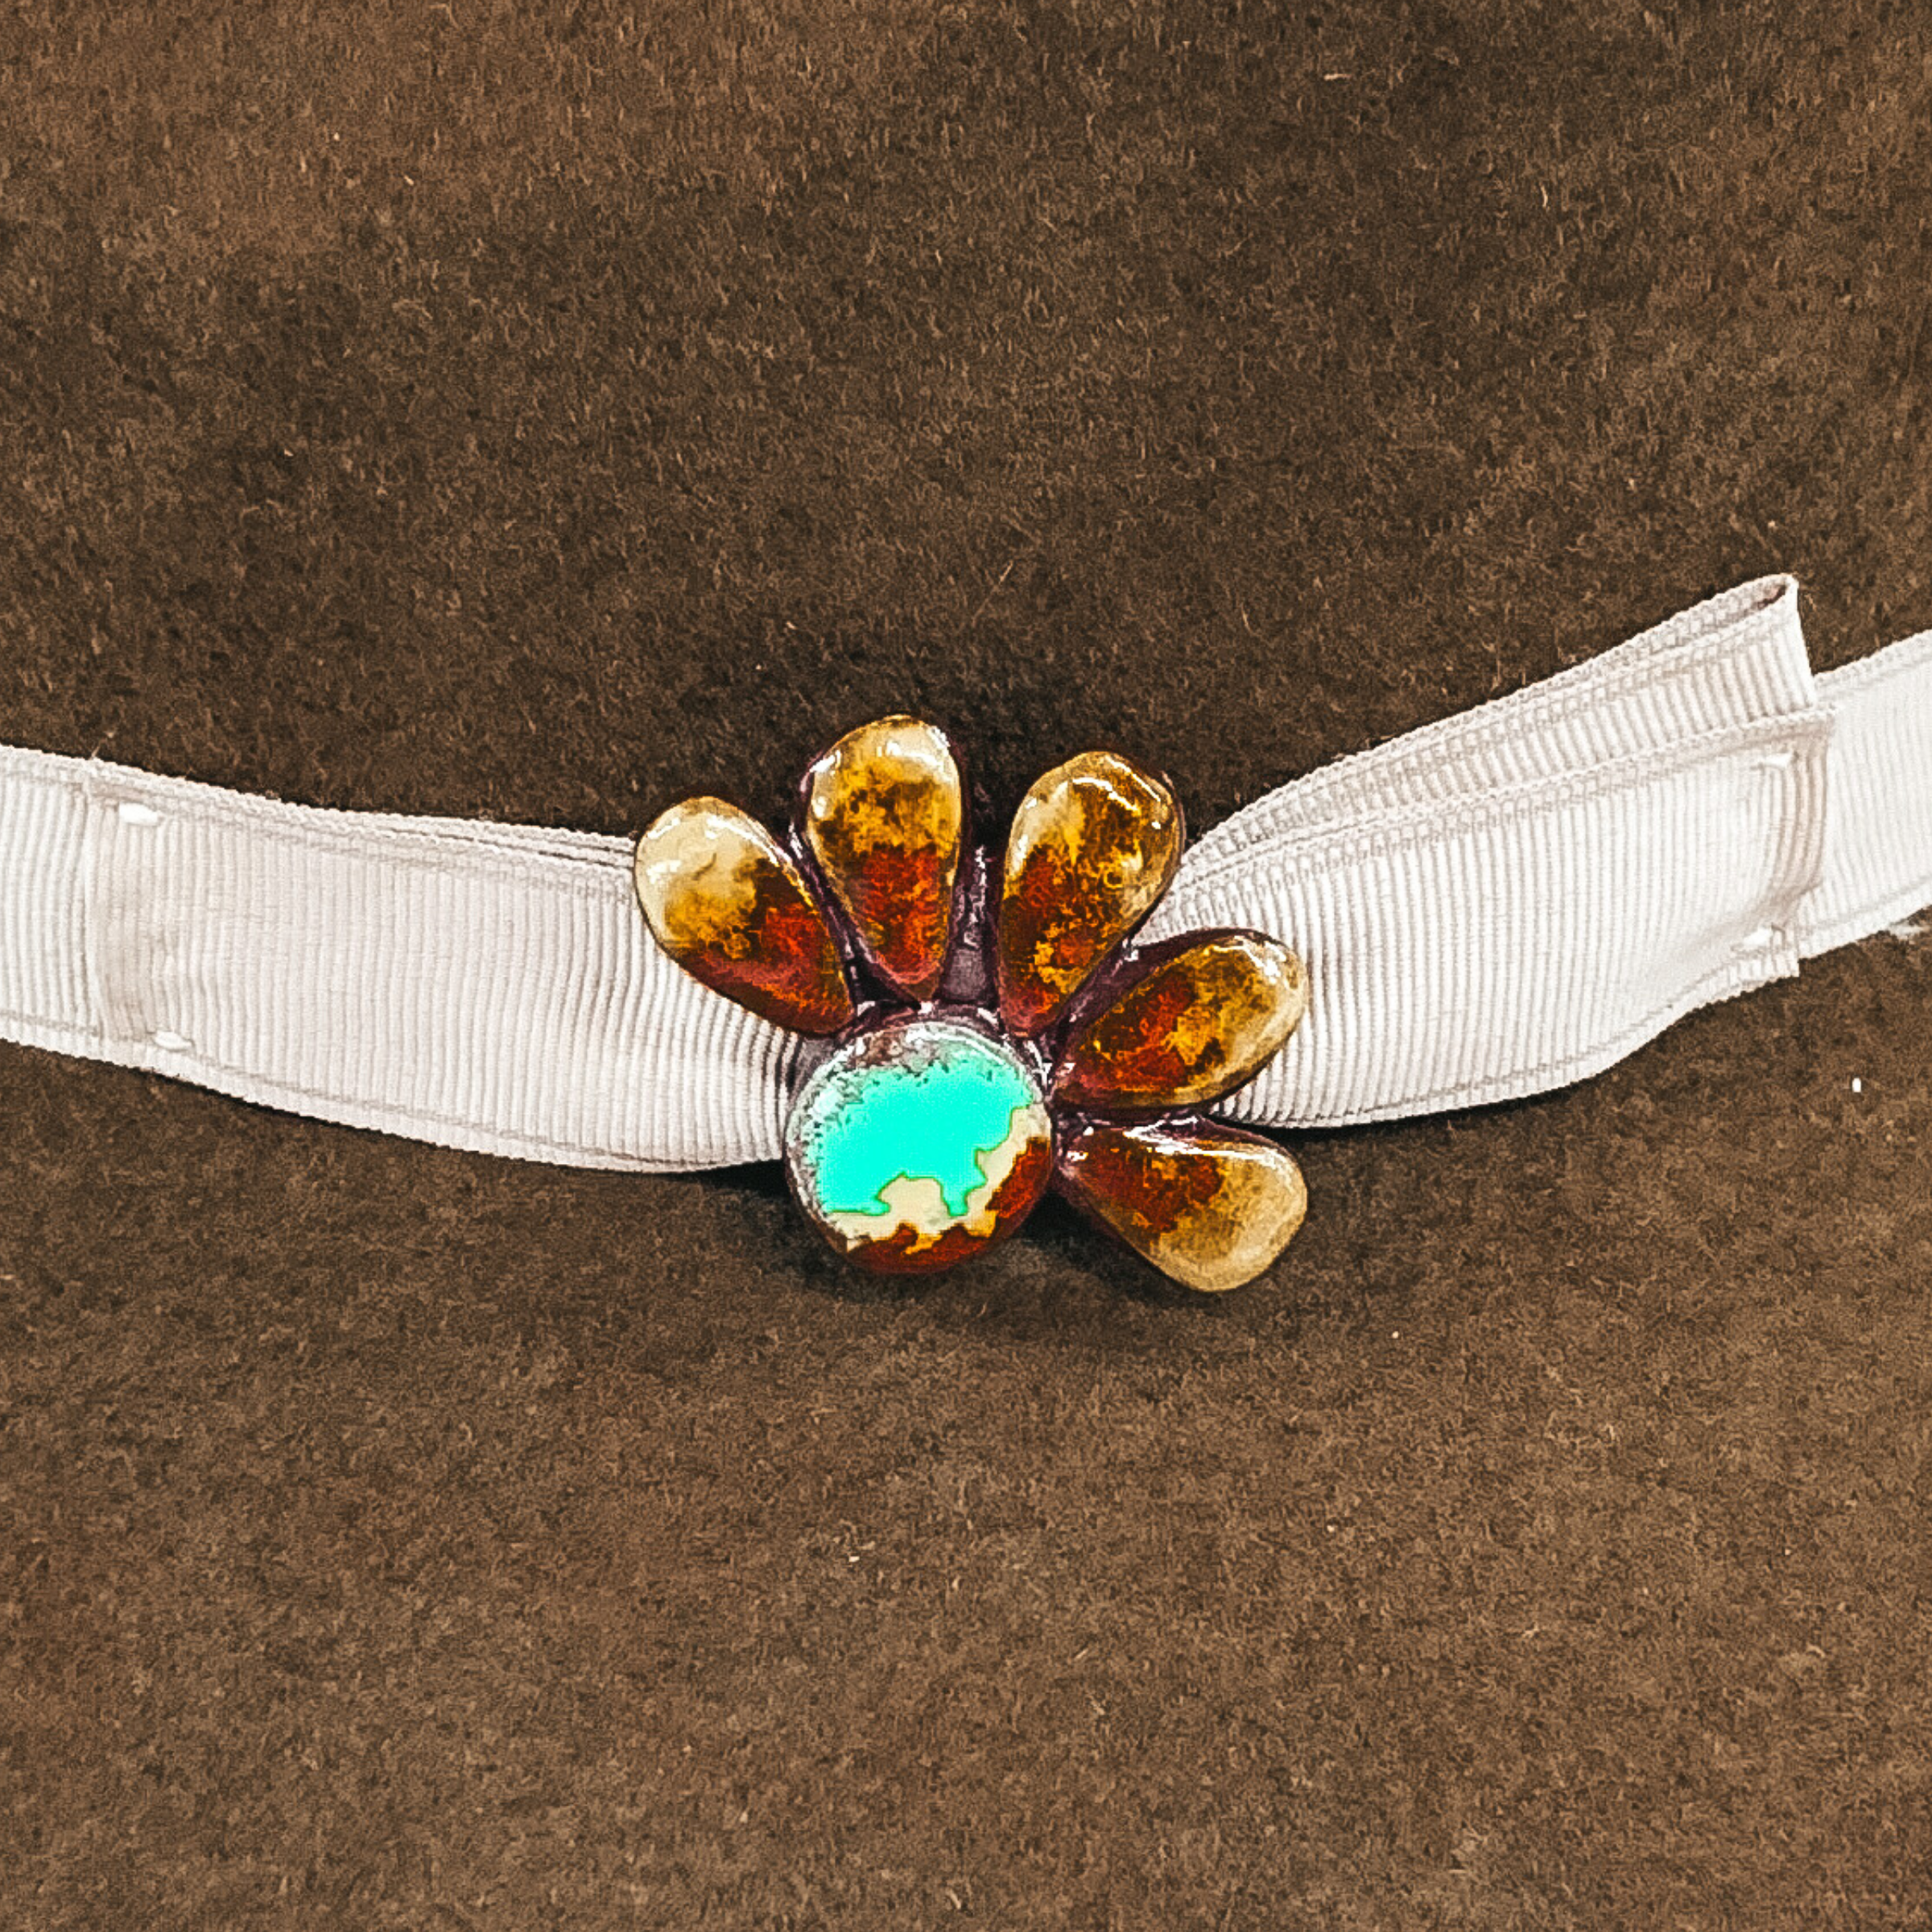 This hat pin is a half of a concho flower. The main color is turquoise and is mixed with brown, red and yellow like real turquoise. This hat pin is pictured in front of a beige hat band on a brown hat.